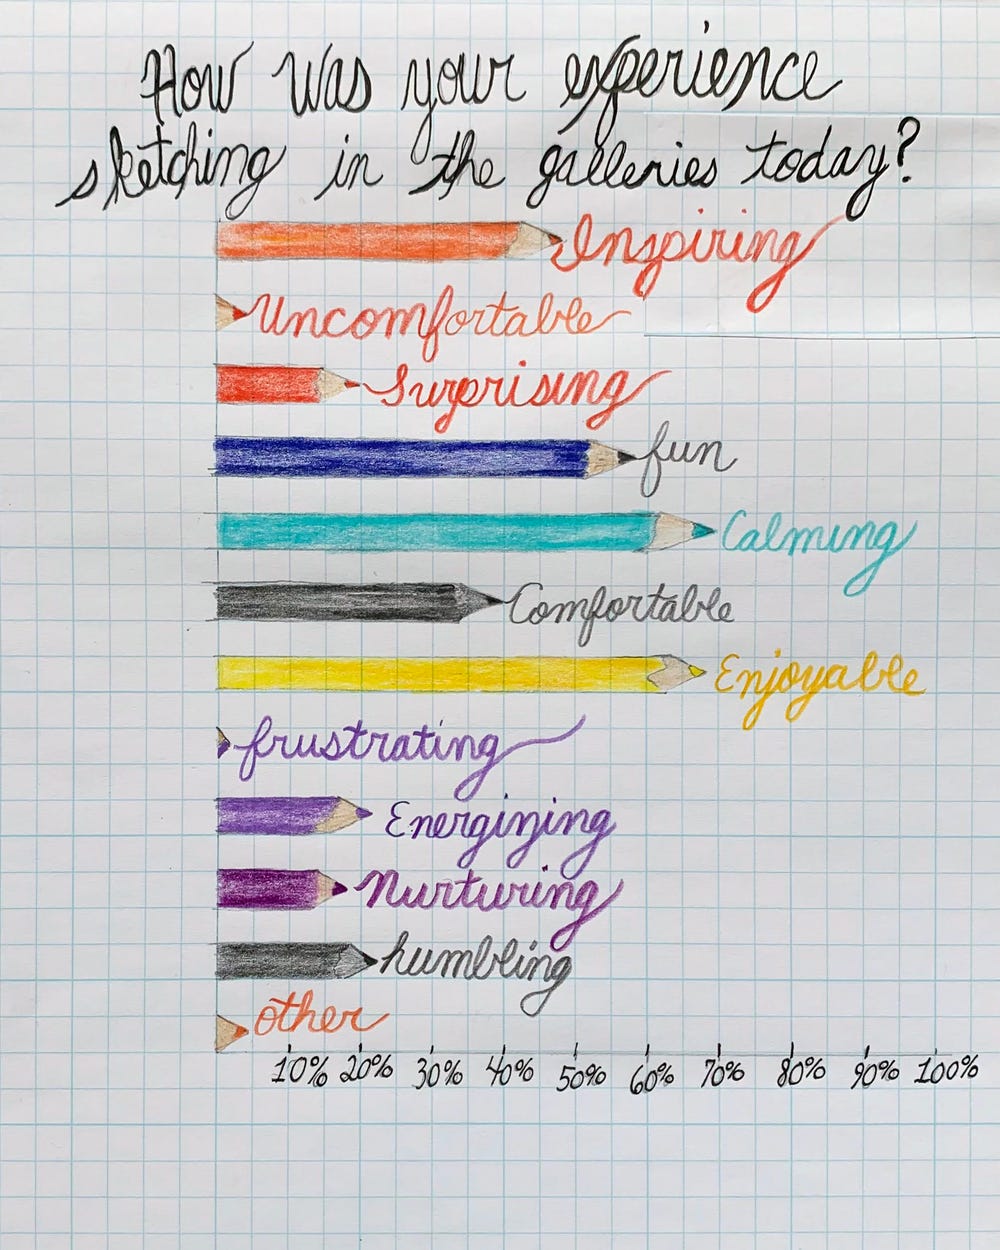 A graph of sketching experiences, with the bars as colored pencils.